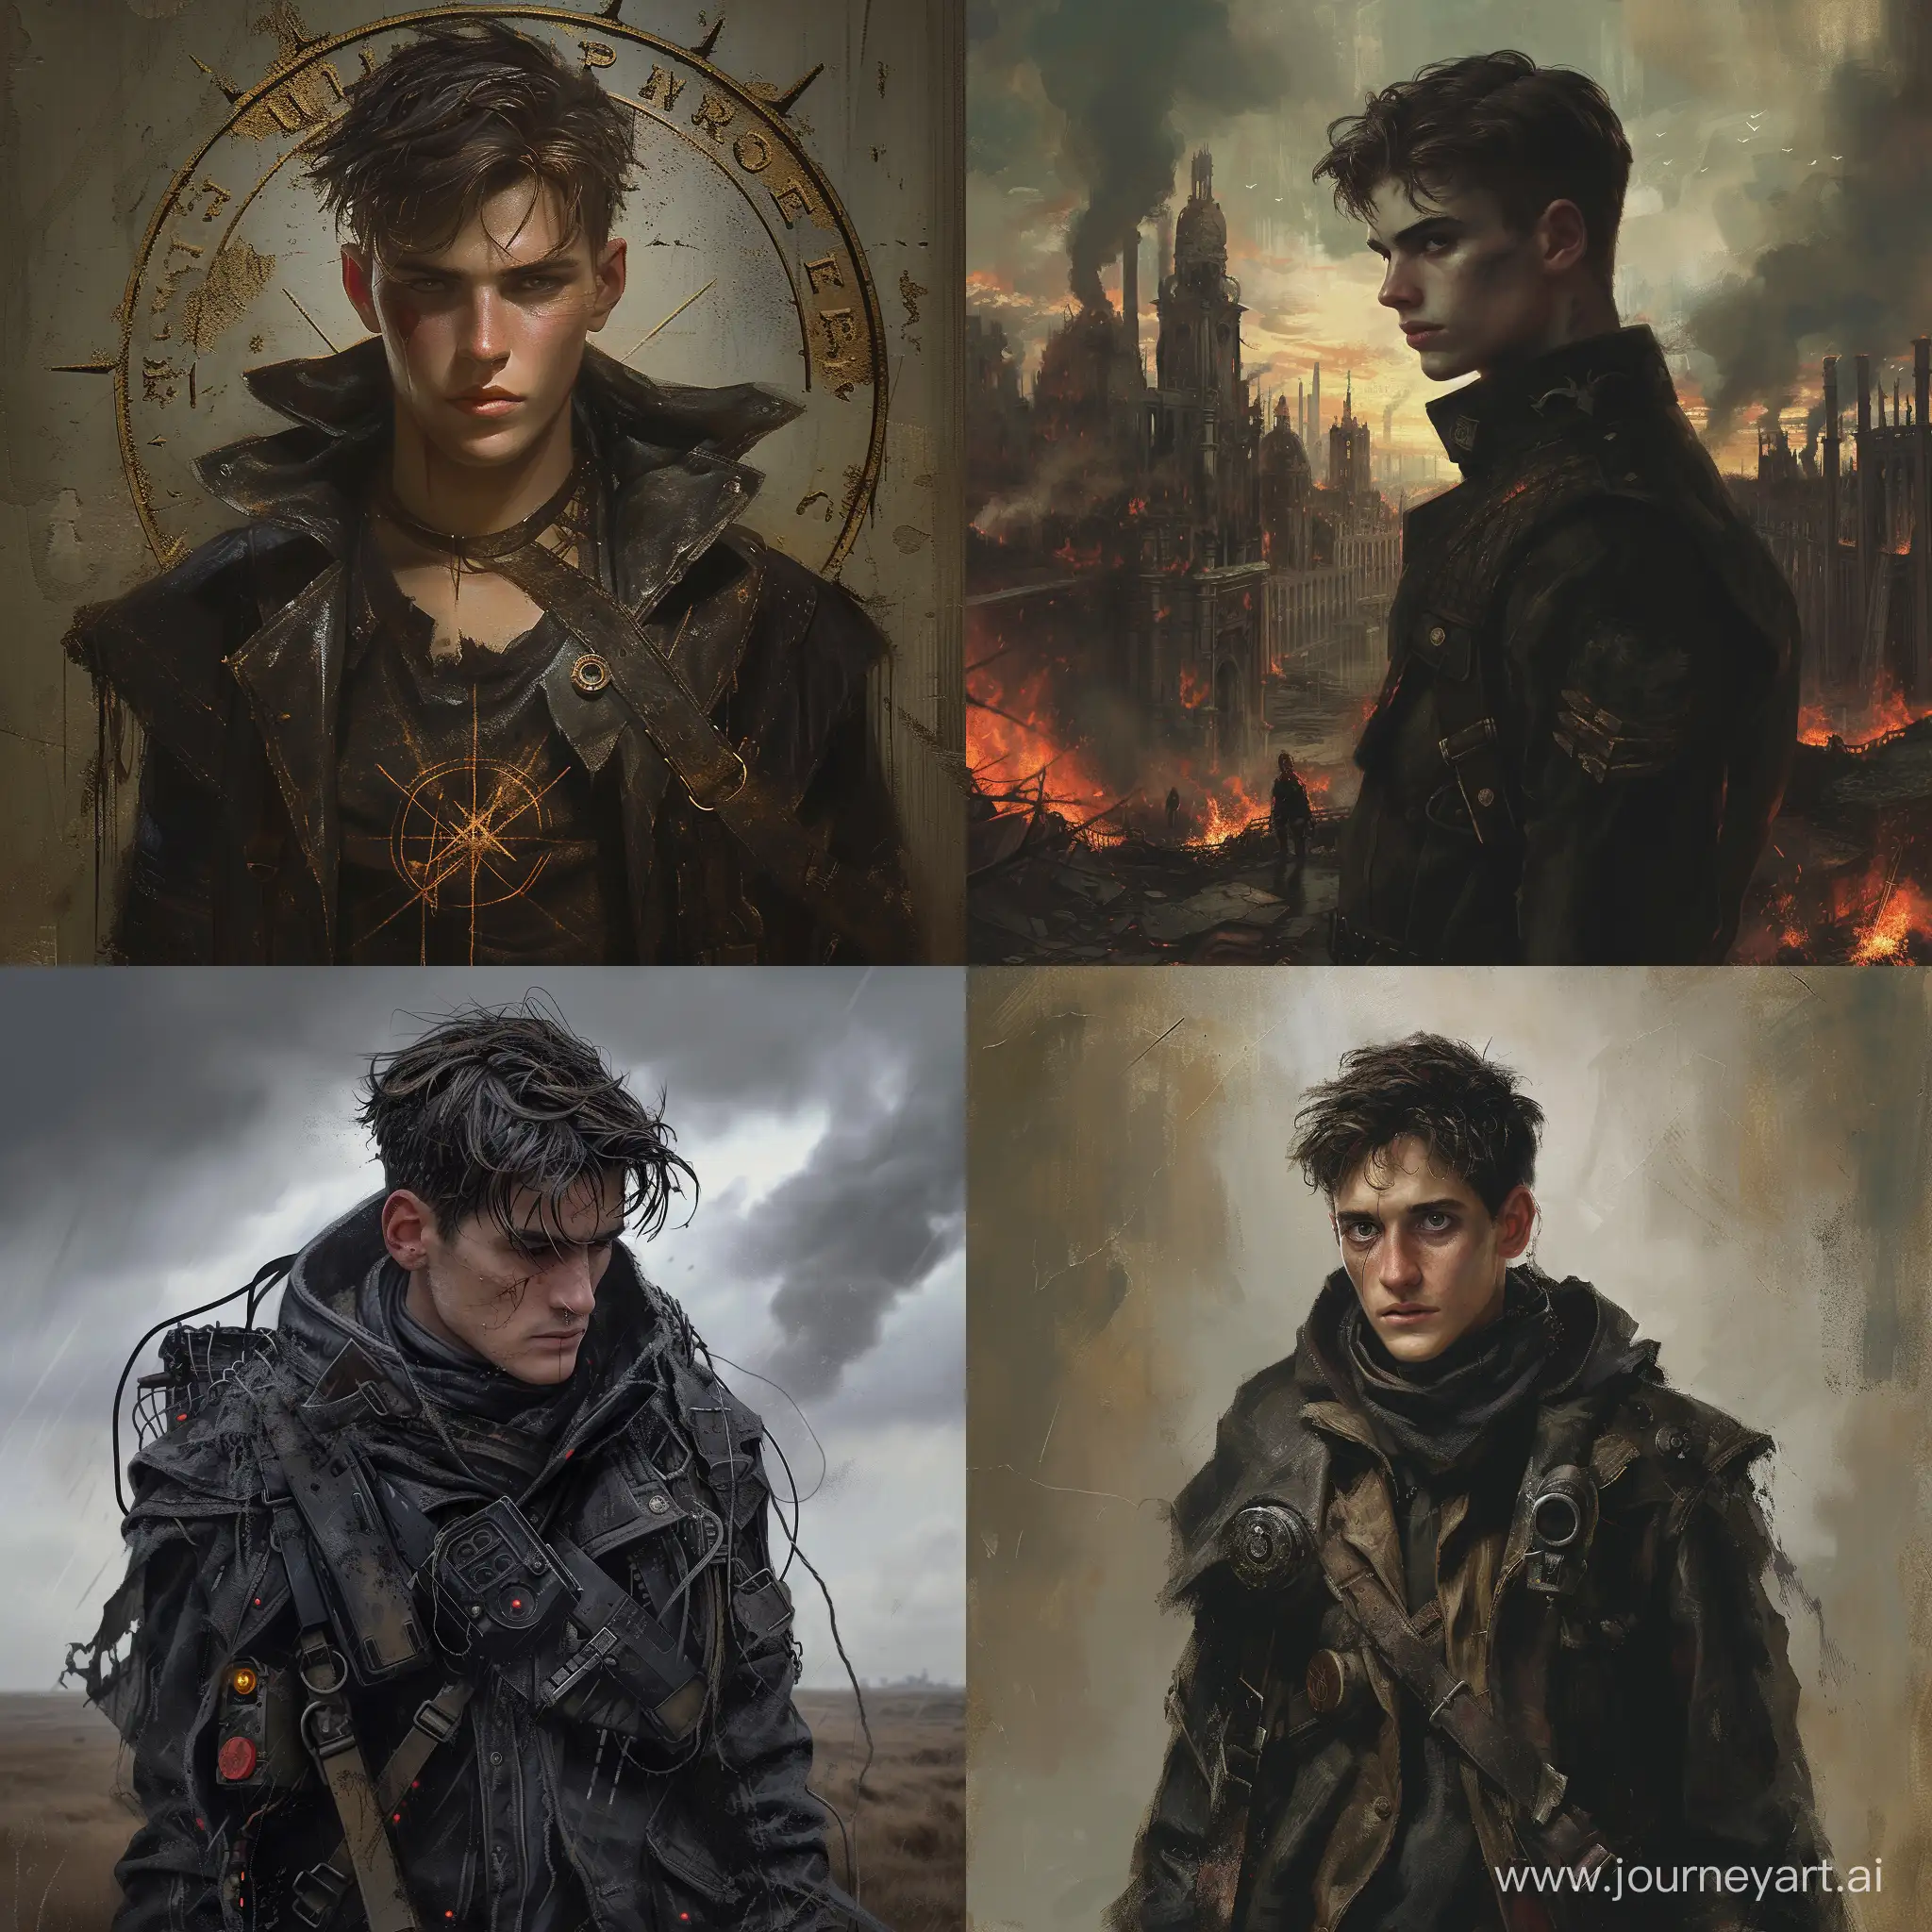 PostApocalyptic-Aristocracy-Son-of-Darkness